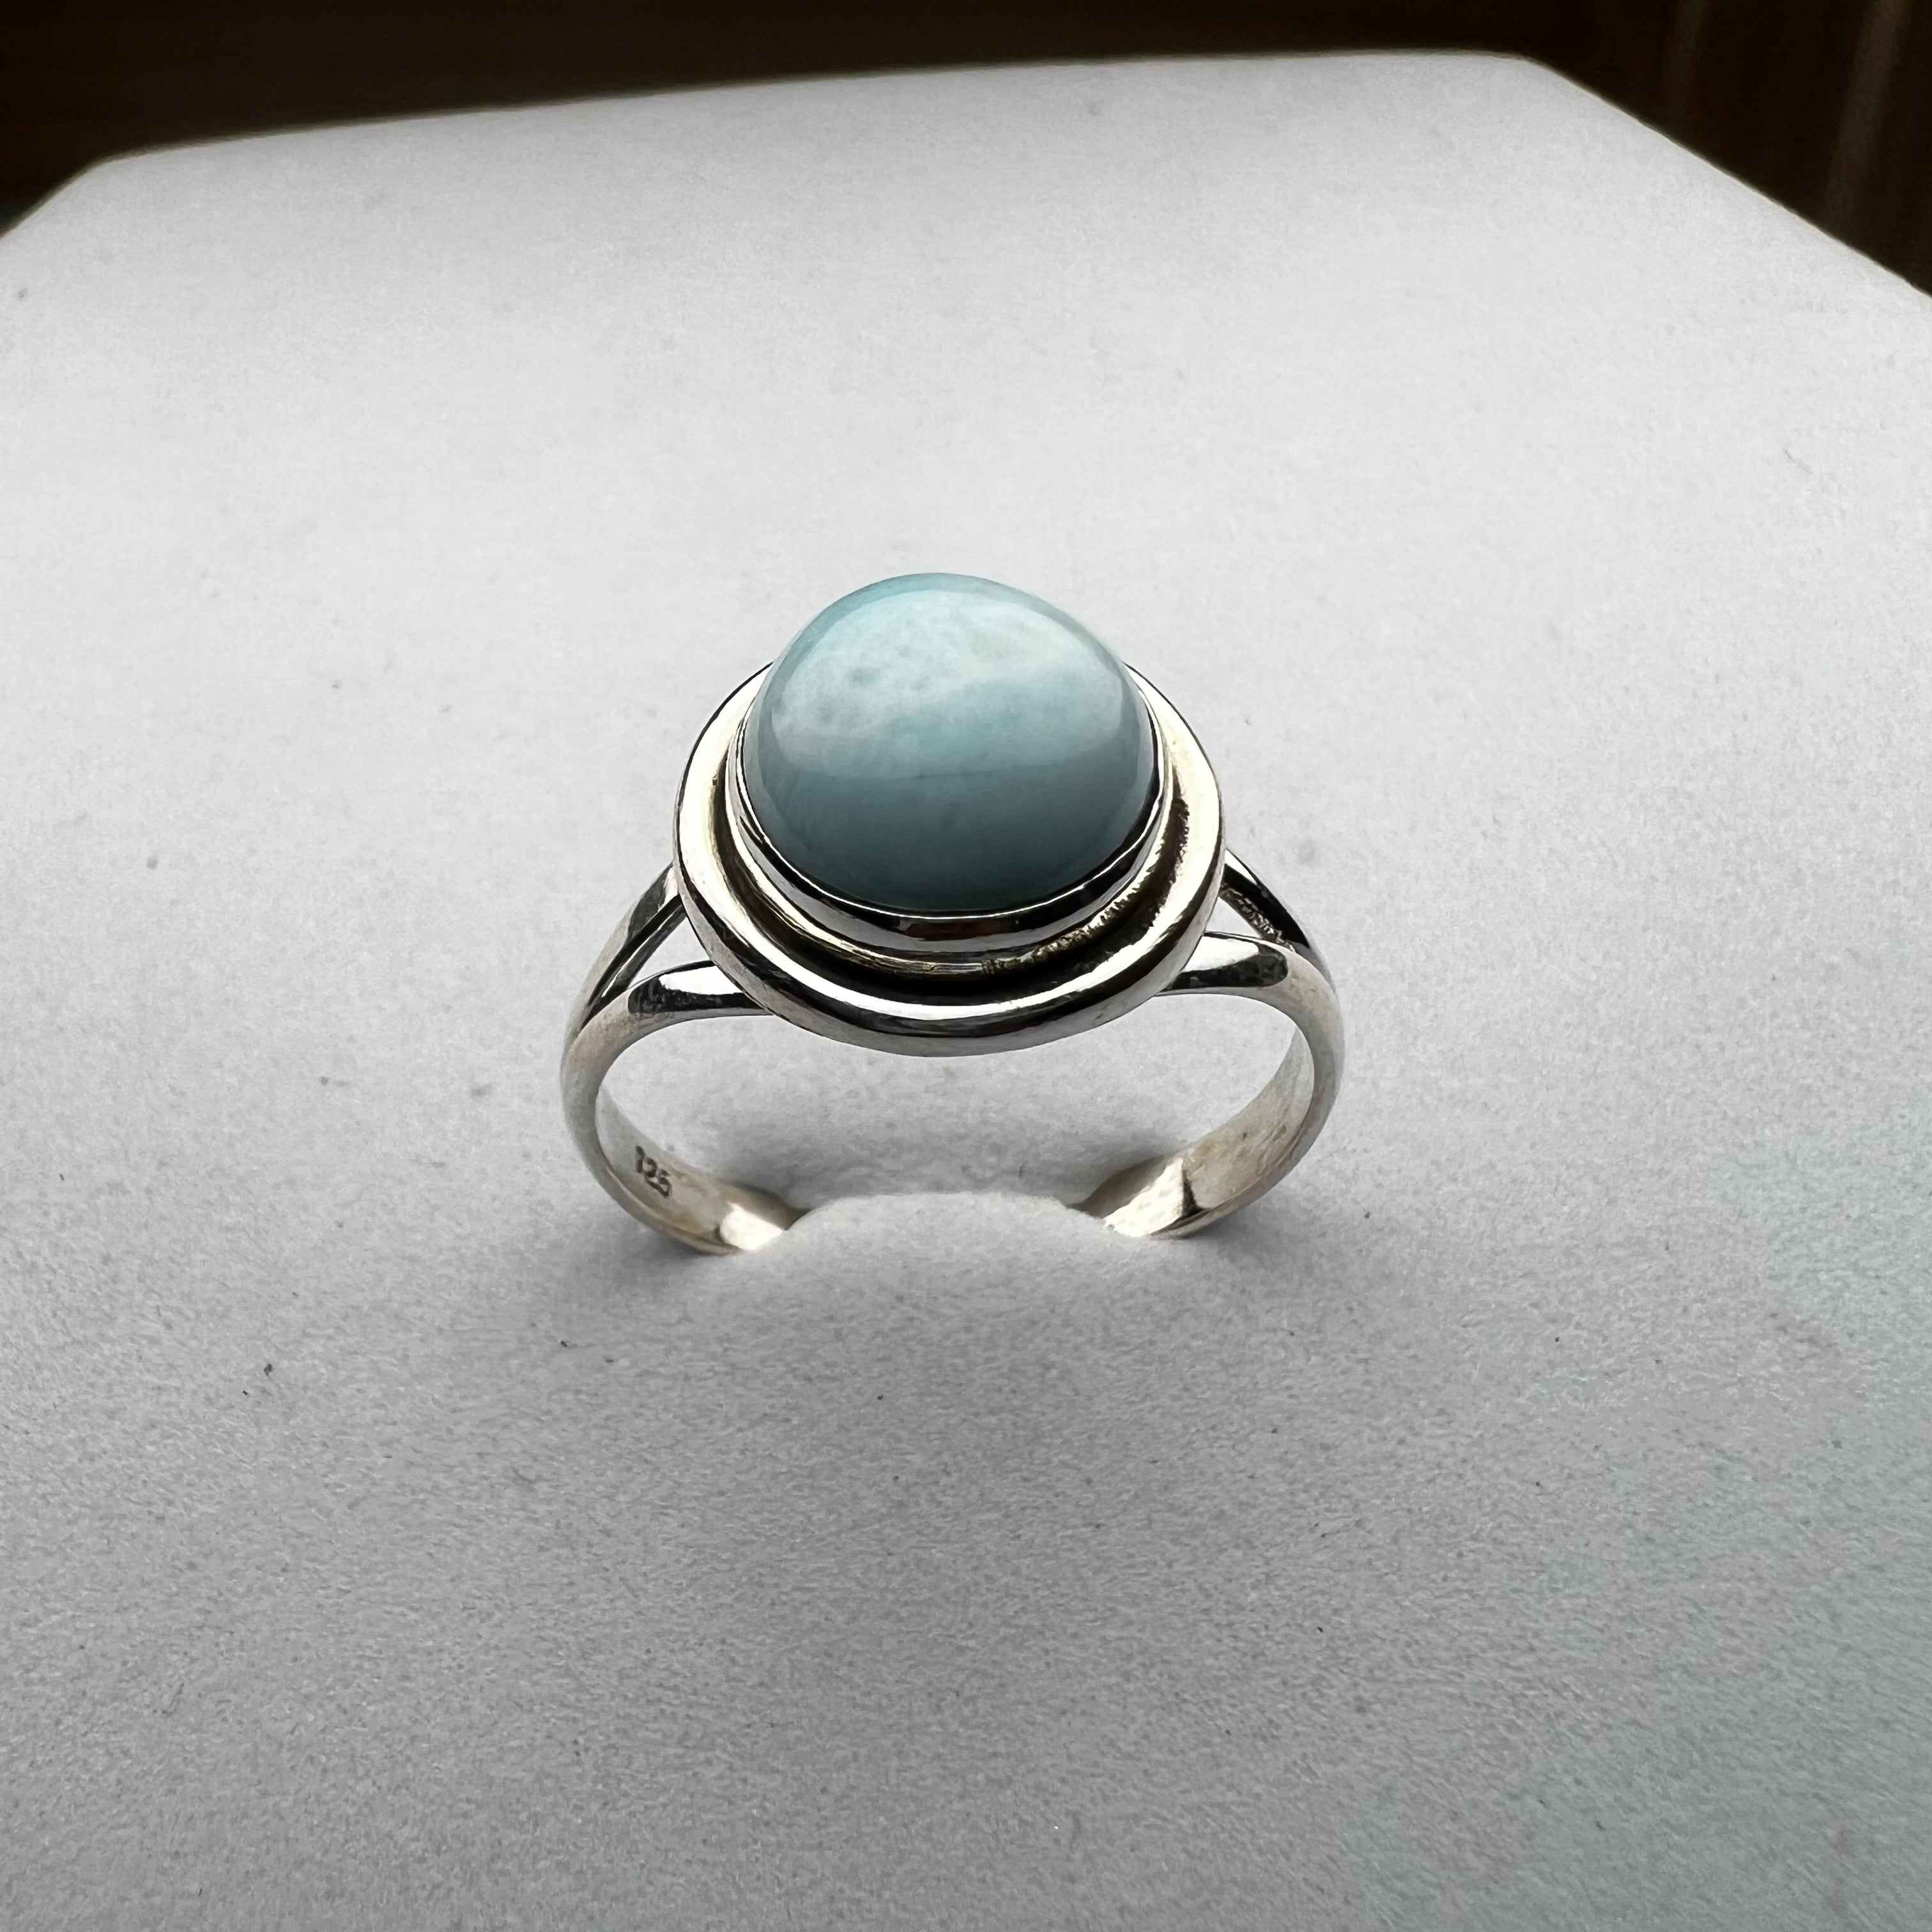 HANDCRAFTED LARIMAR RING IN
SILVER 925 (SIZE 9)